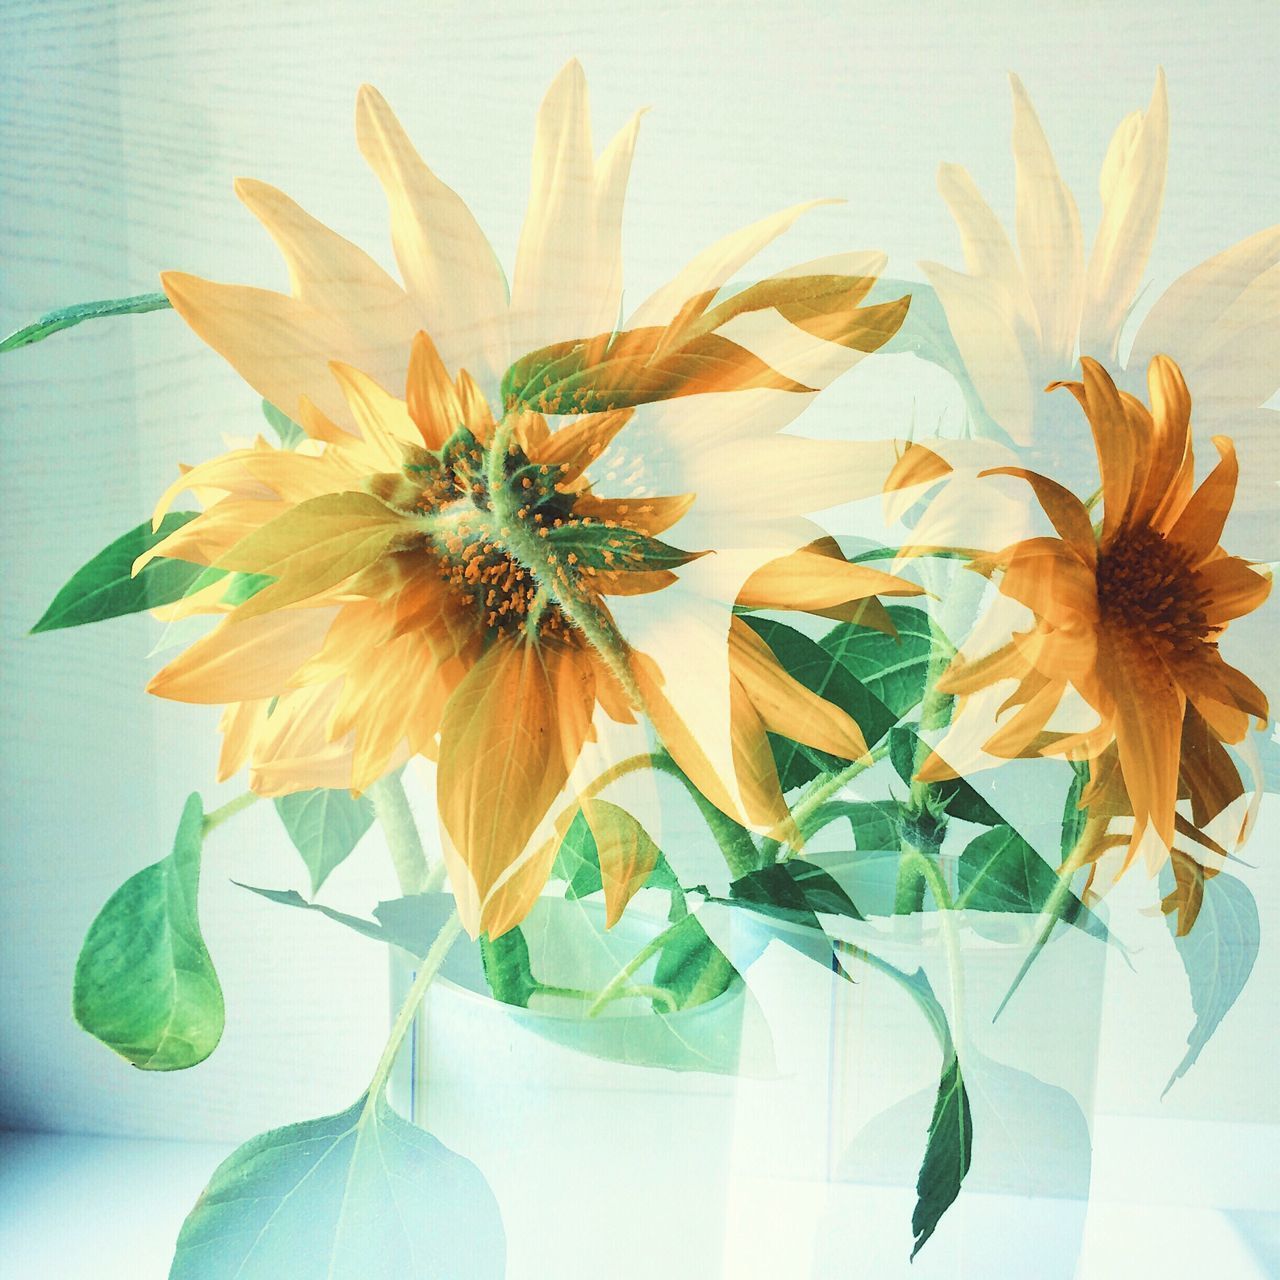 CLOSE-UP OF SUNFLOWERS BLOOMING IN VASE